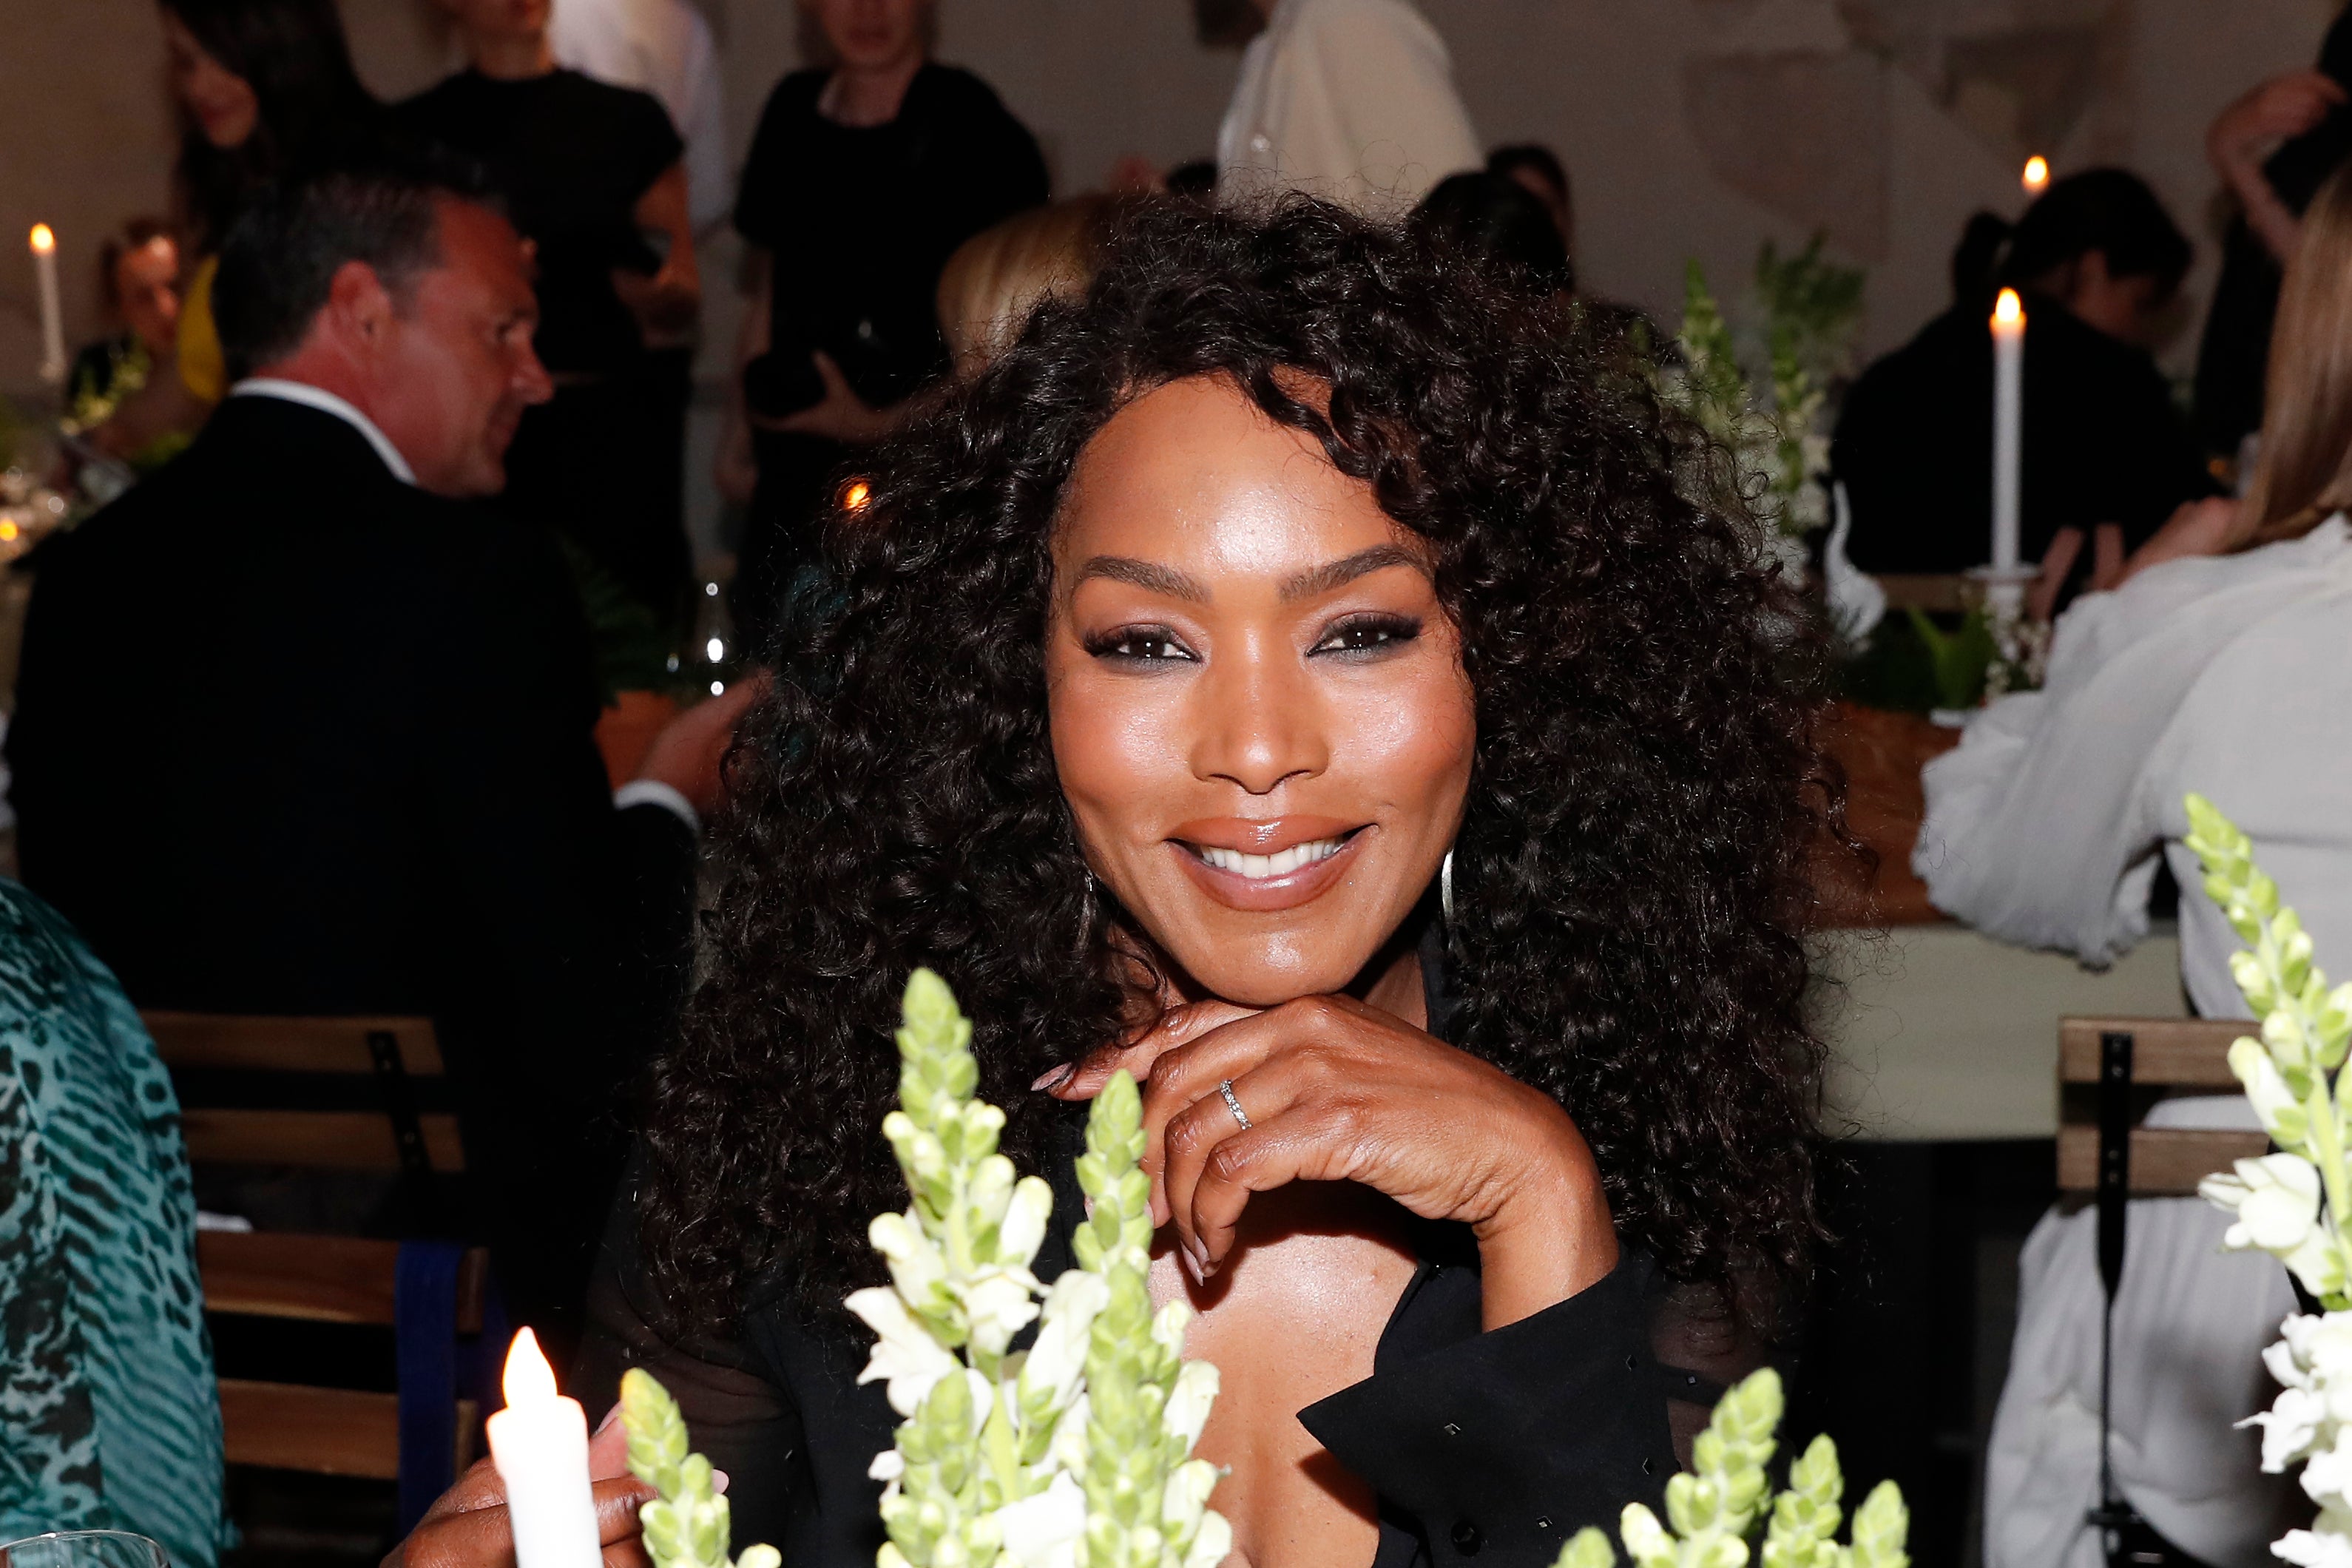 Angela Bassett Shows Support To Afton Williamson For Speaking Out About Alleged Sexual Harassment On Set